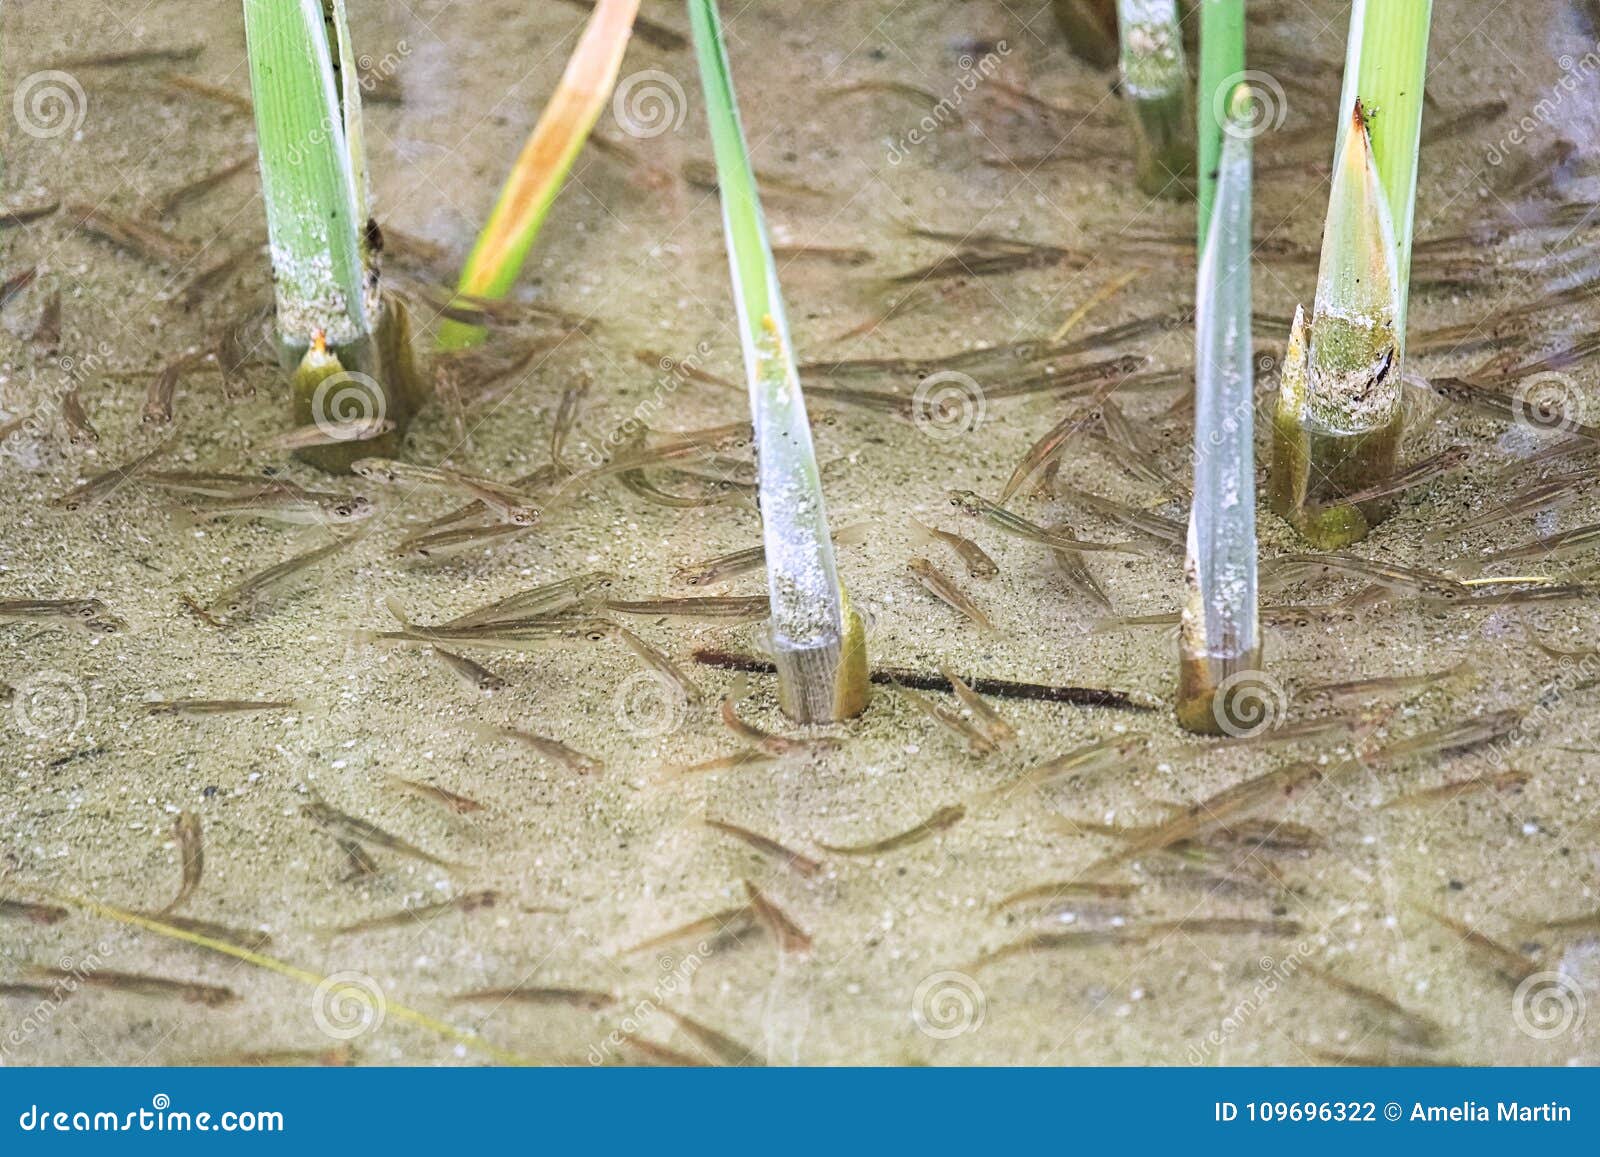 Minnows Swimming in Reeds in Shallow Water Stock Photo - Image of pattern,  reflection: 109696322